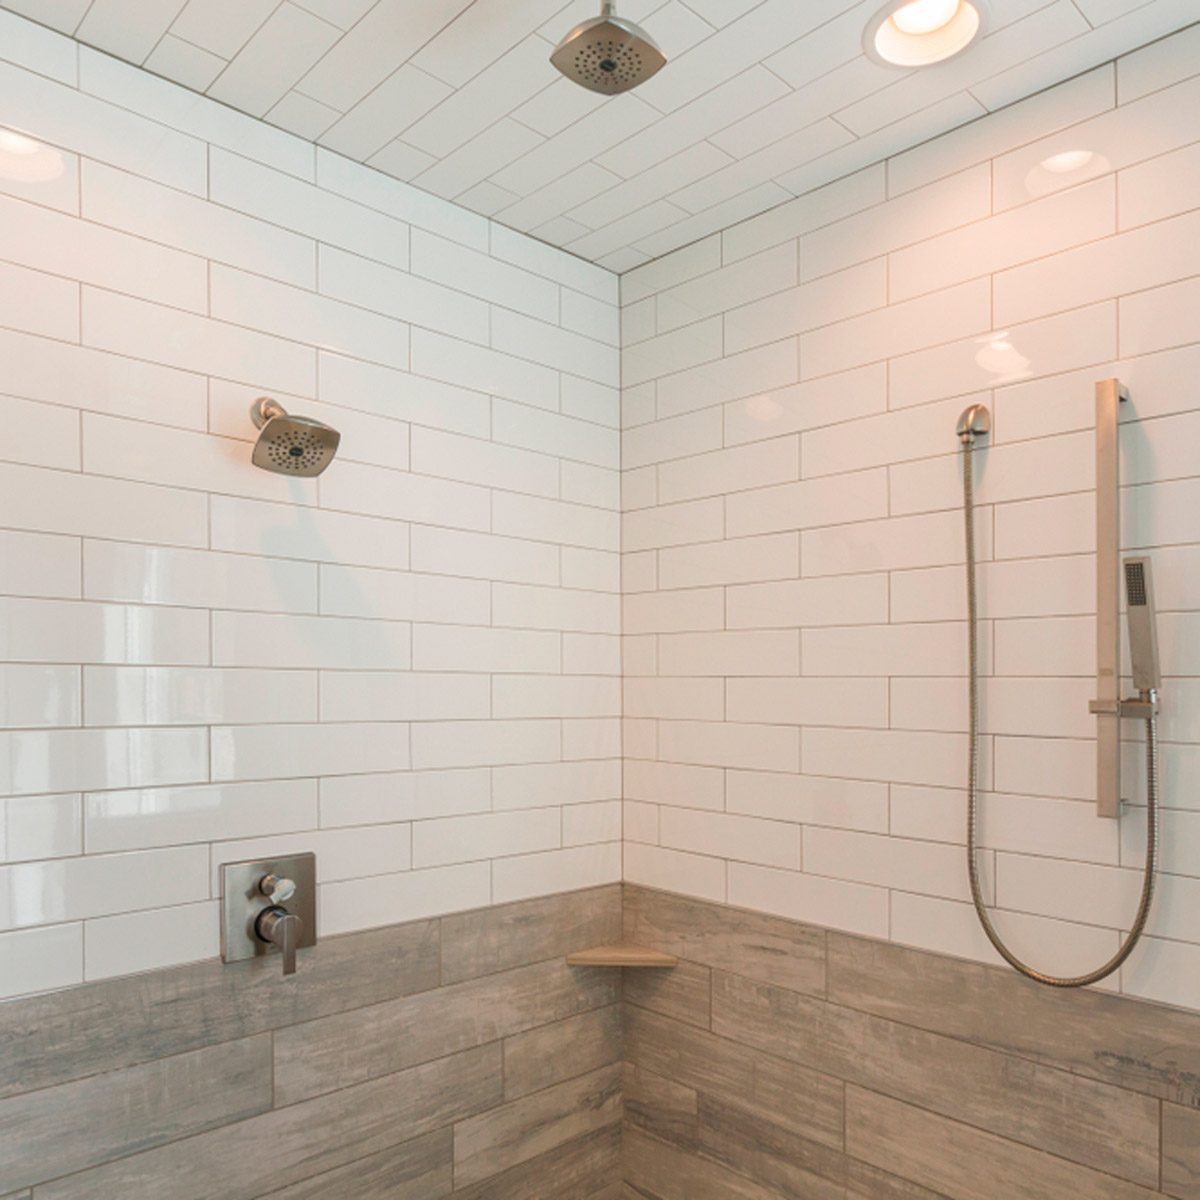 How To Build A Steam Shower Ceiling